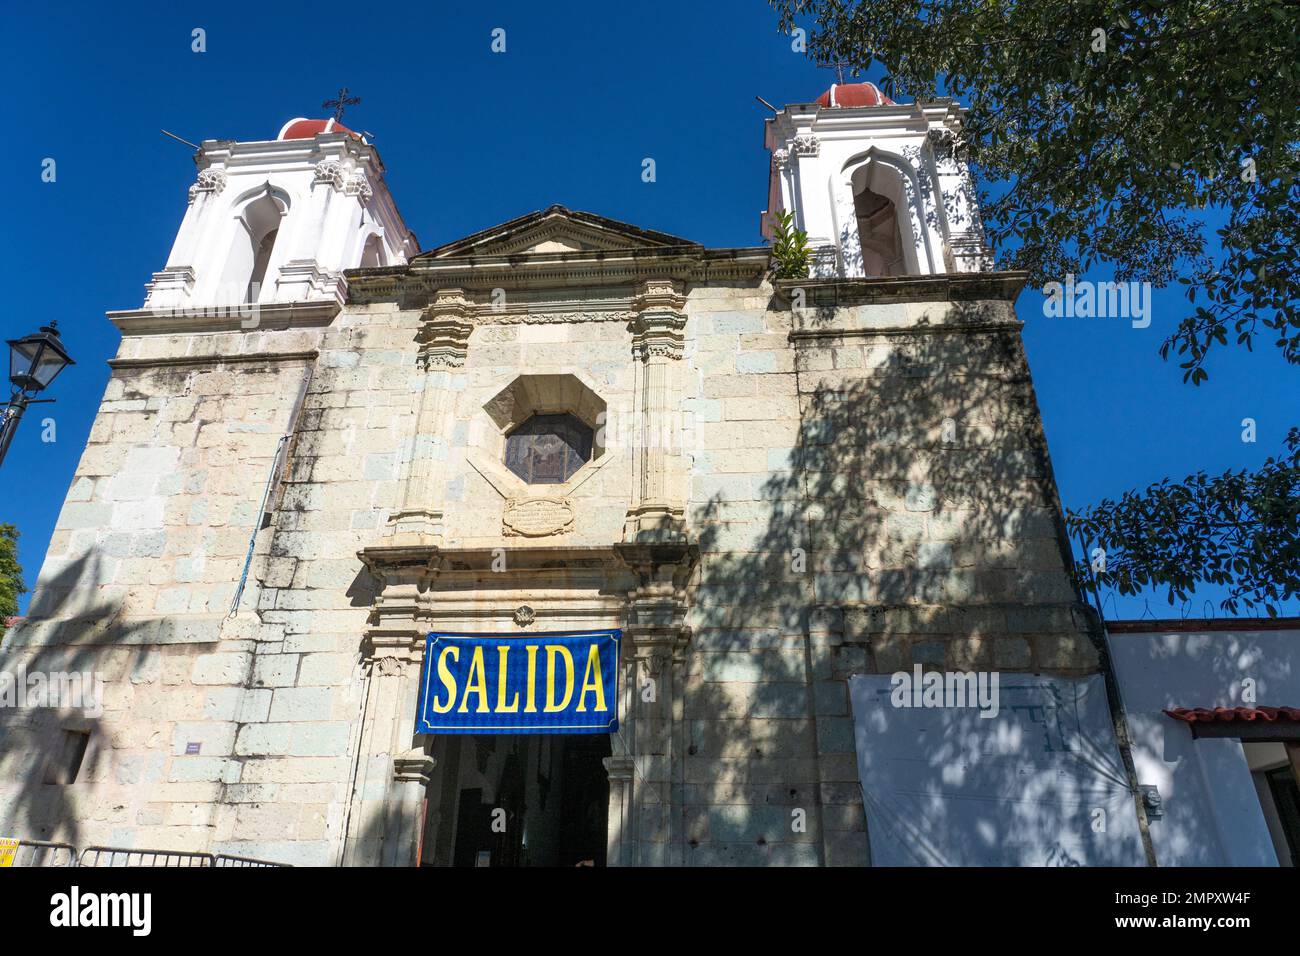 The Church of Our Lady of Guadalupe or Nuestra Senora de Guadalupe y Capilla de Belén in Oaxaca, Mexico.  Founded in 1650.  A UNESCO World Heritage Si Stock Photo